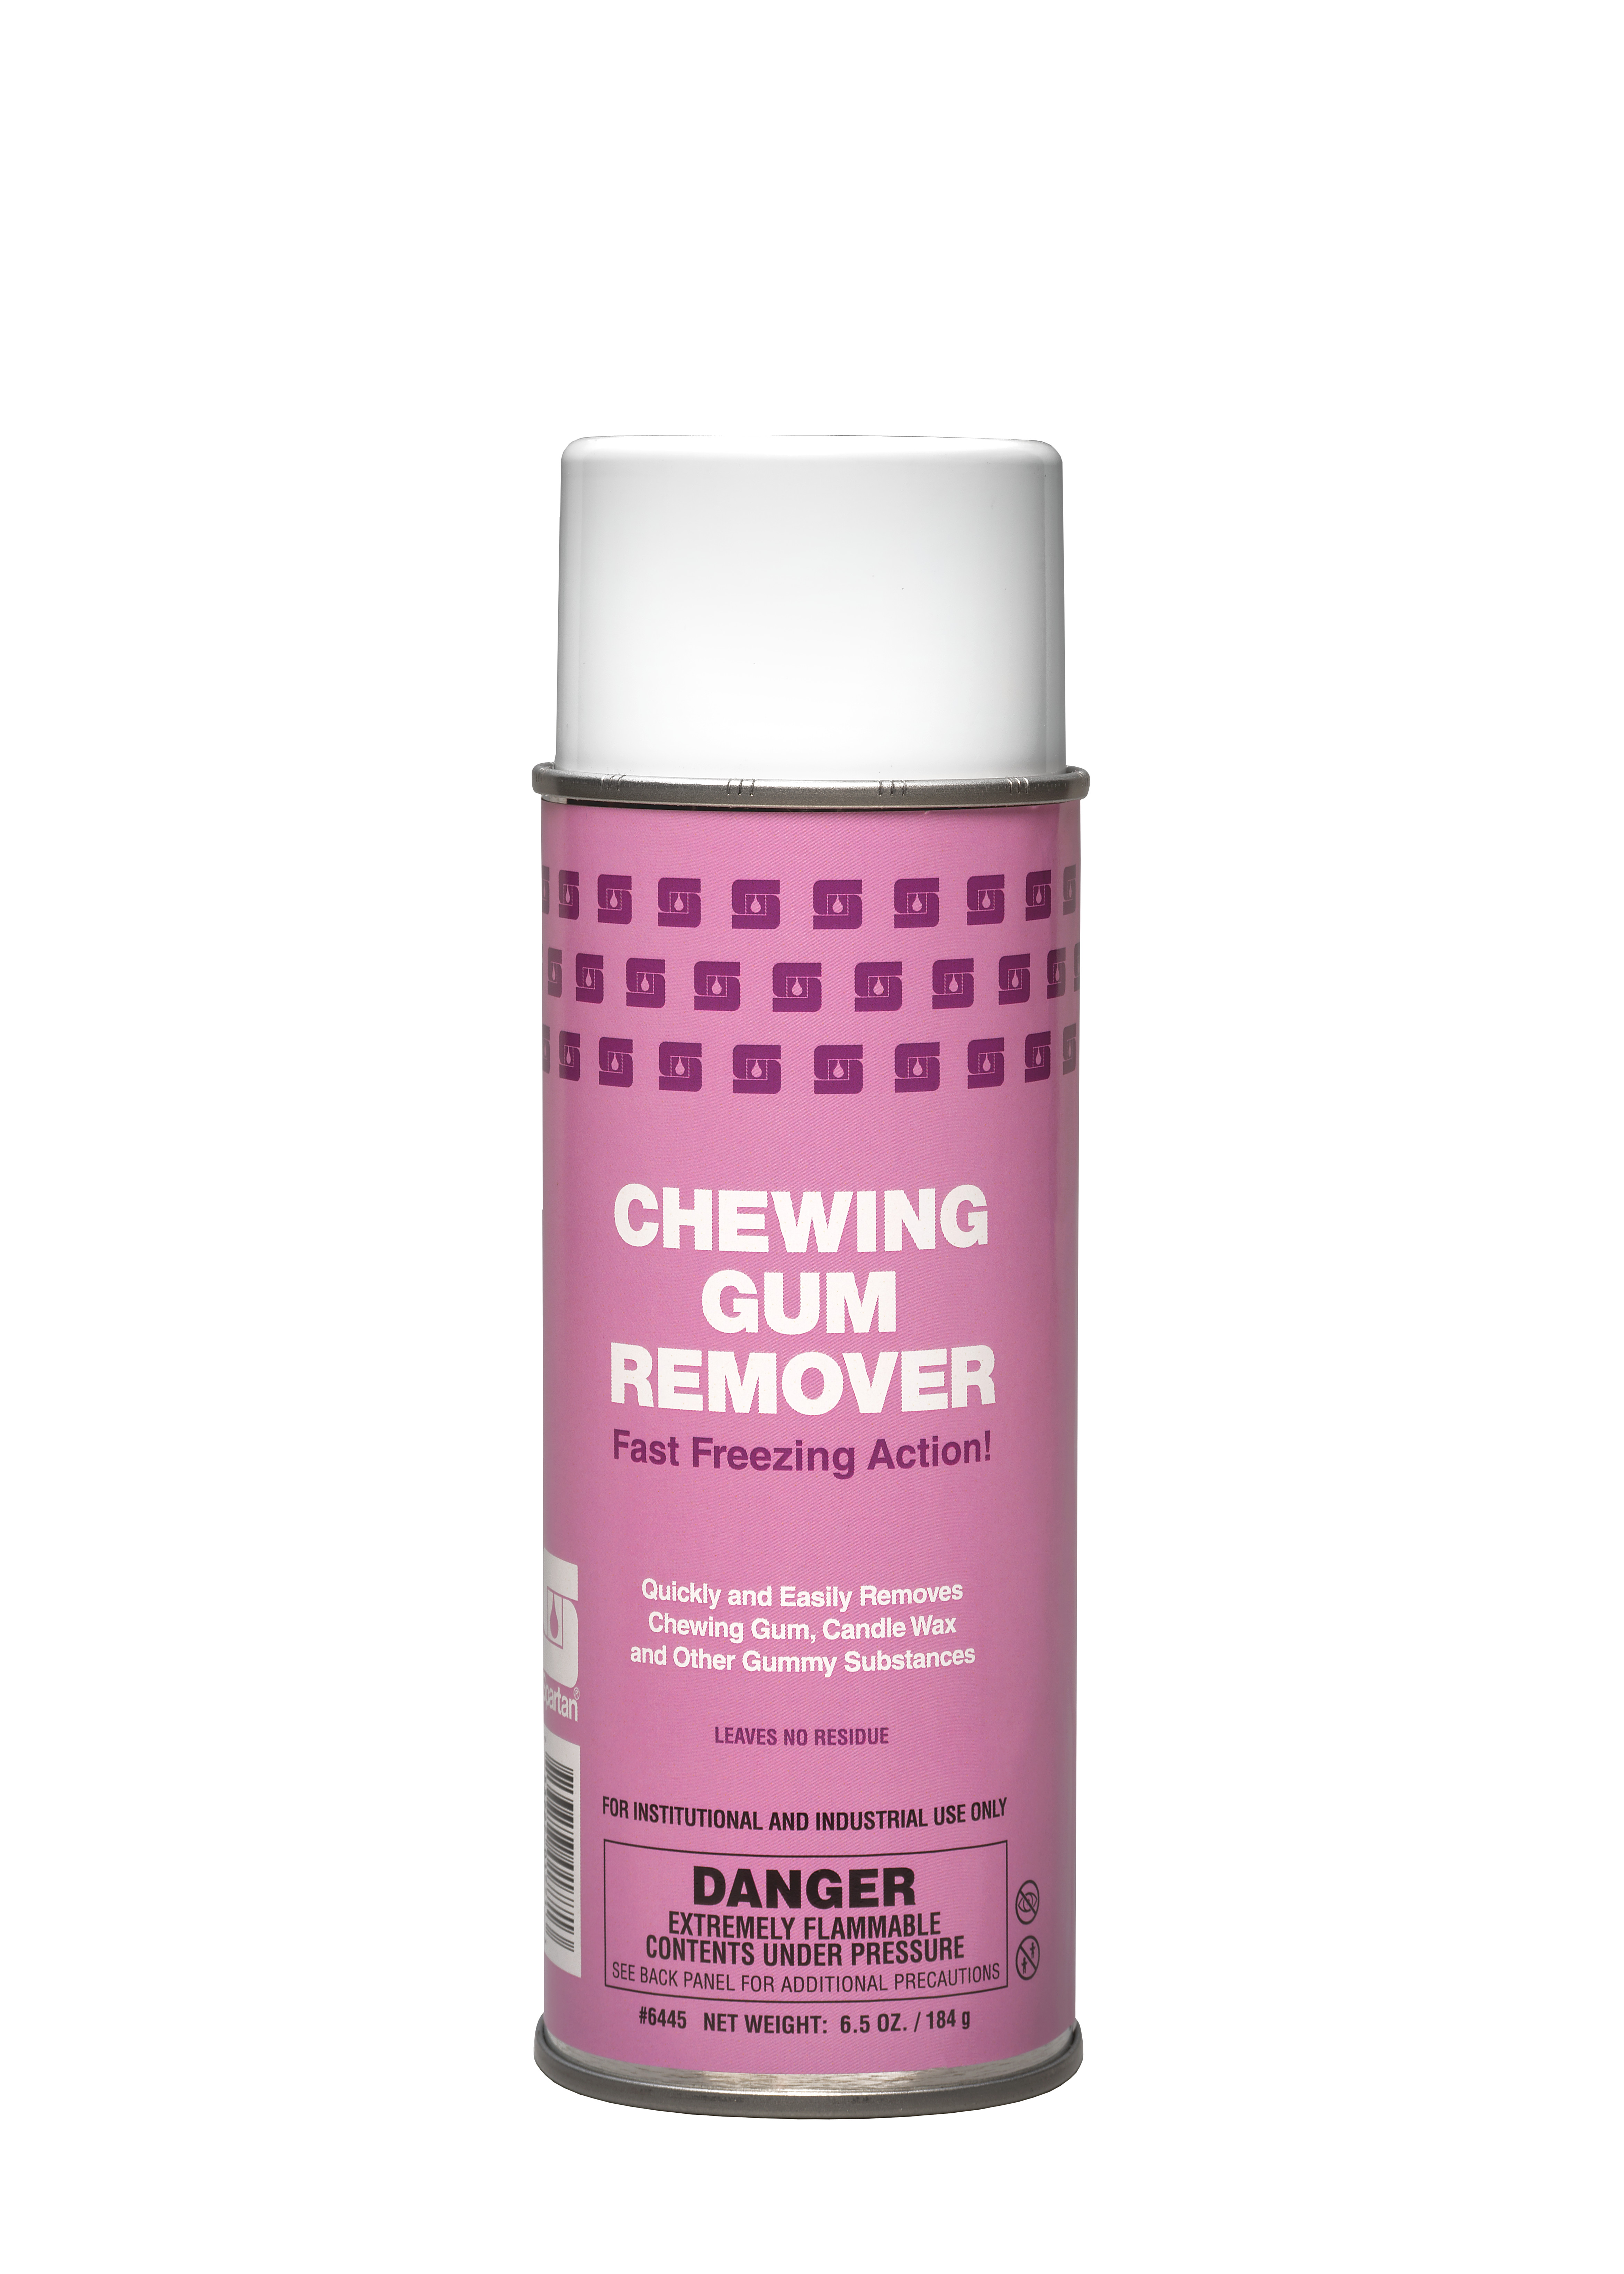 Spartan Chemical Company Chewing Gum Remover, 12-9 OZ.CAN